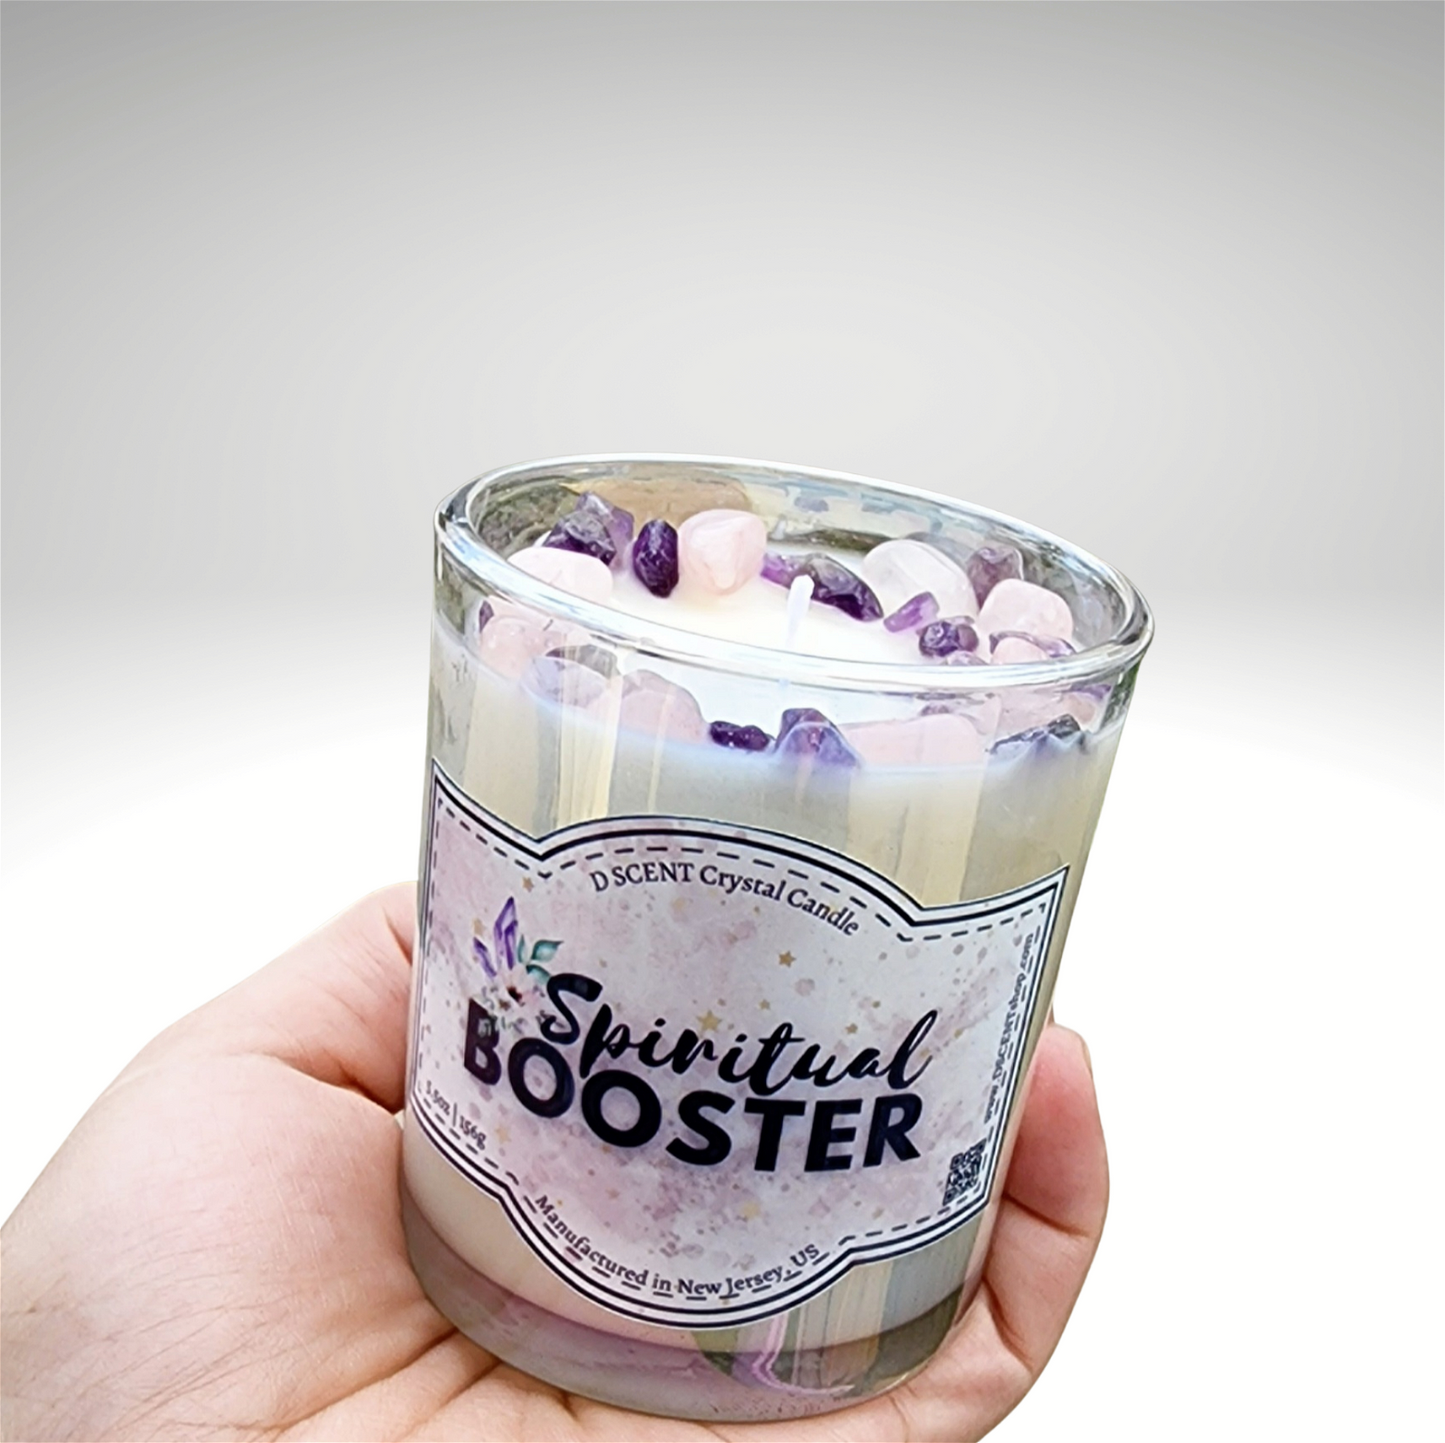 Spiritual BOOSTER Soy Candle | Small Iridescent Jar - D SCENT 